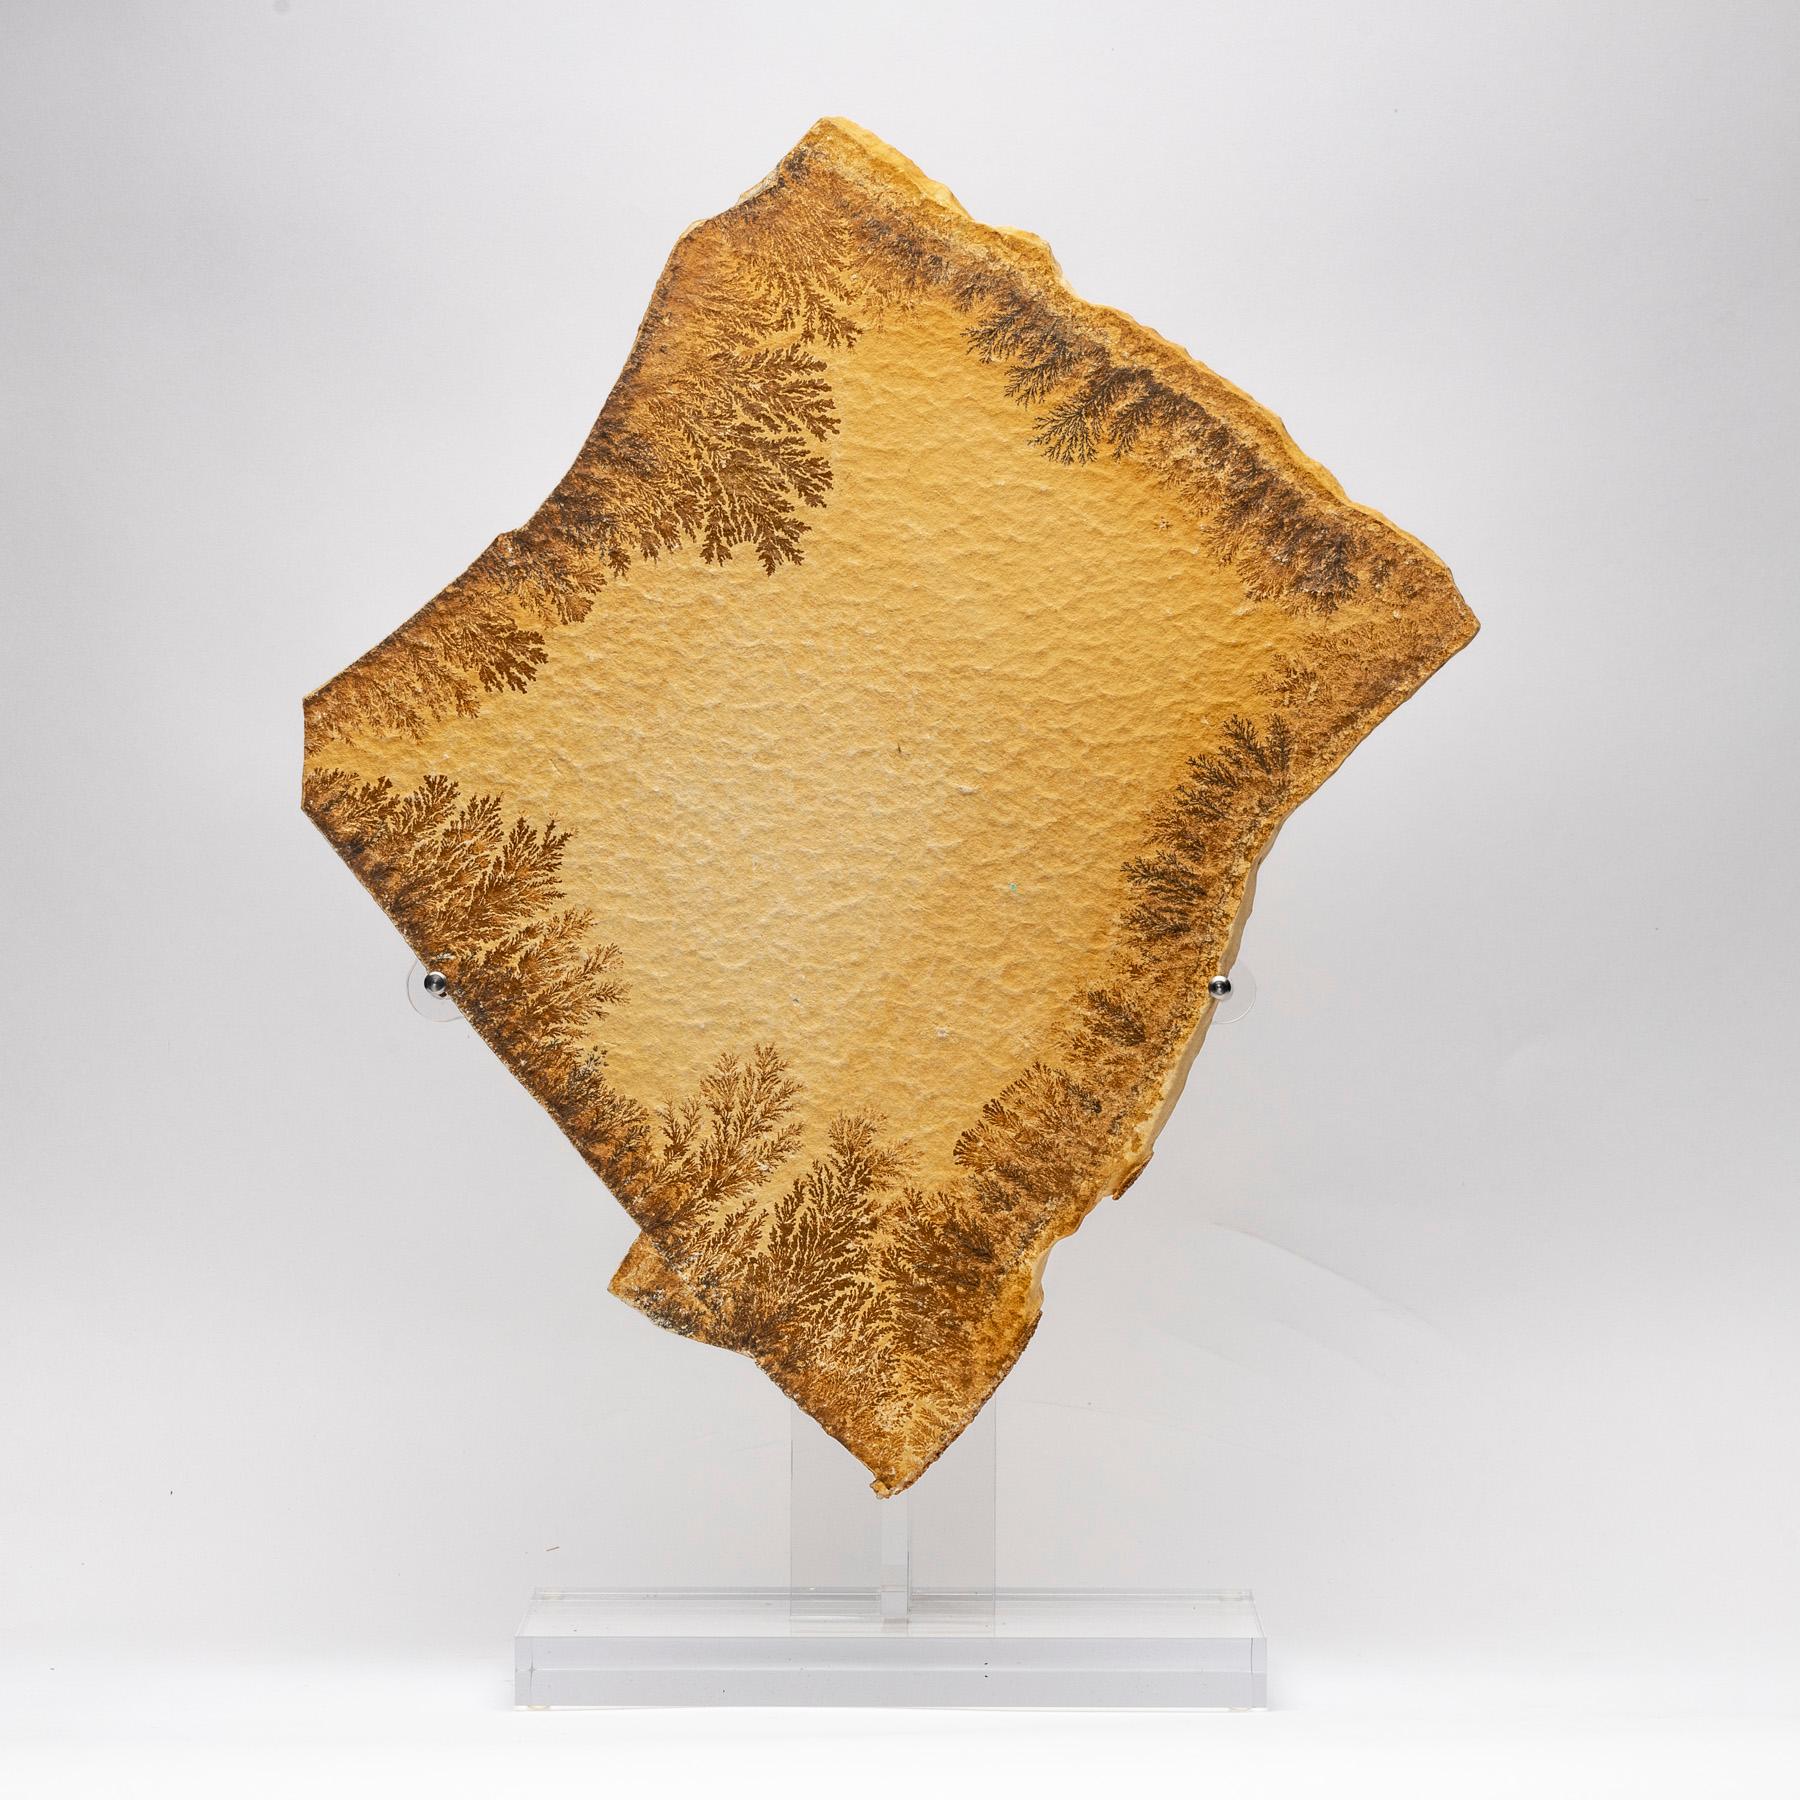 Natural Dendrite from Germany mounted in a custom acrylic base.

Many people confuse dendrites with fossils because or their appearance but they are actually crystals. A crystal dendrite is a crystal that develops with a typical multi-branching